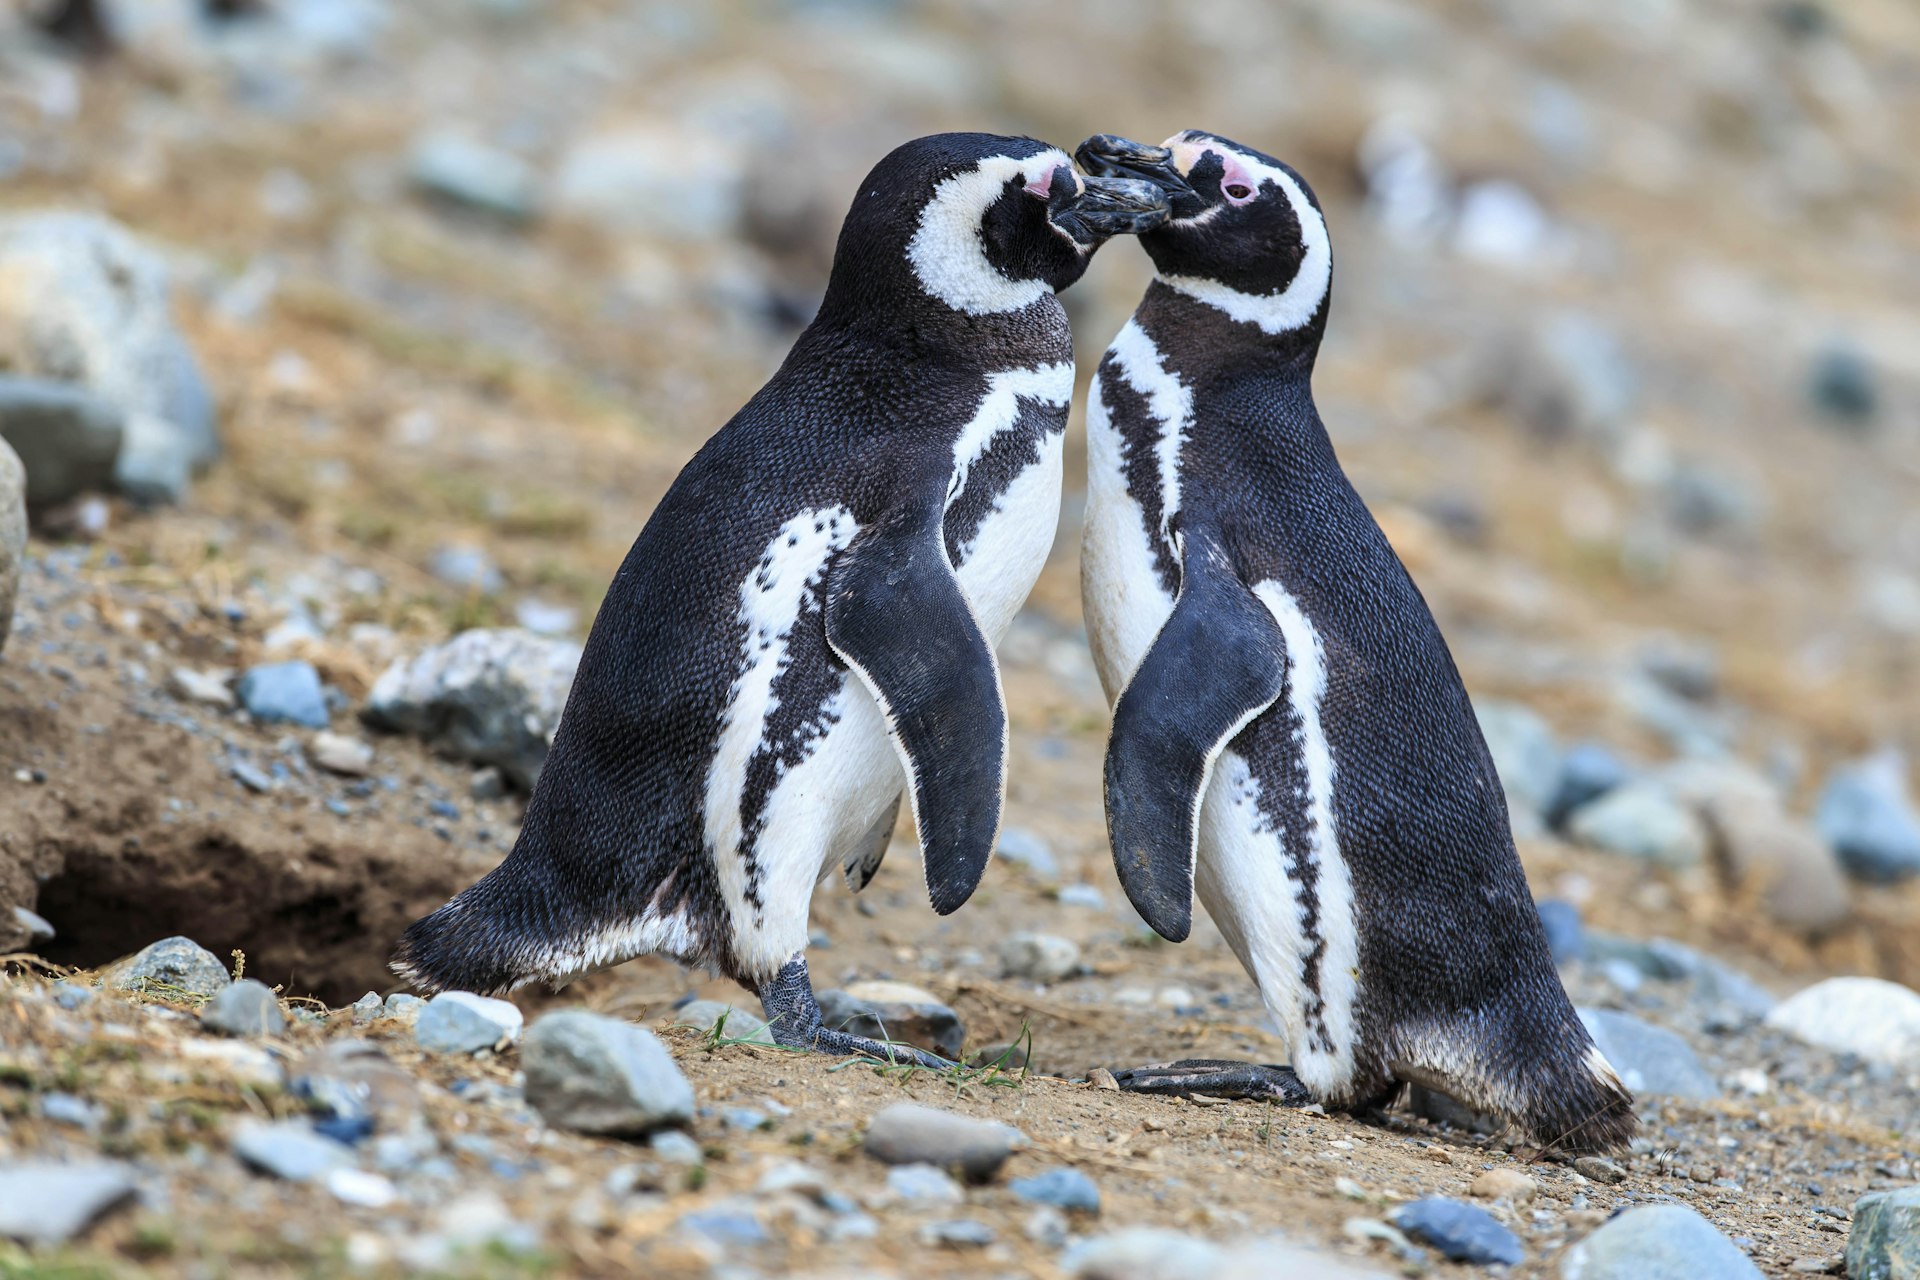 Two Magellanic penguins touch beaks near a nest on Magdalena Island, Argentina